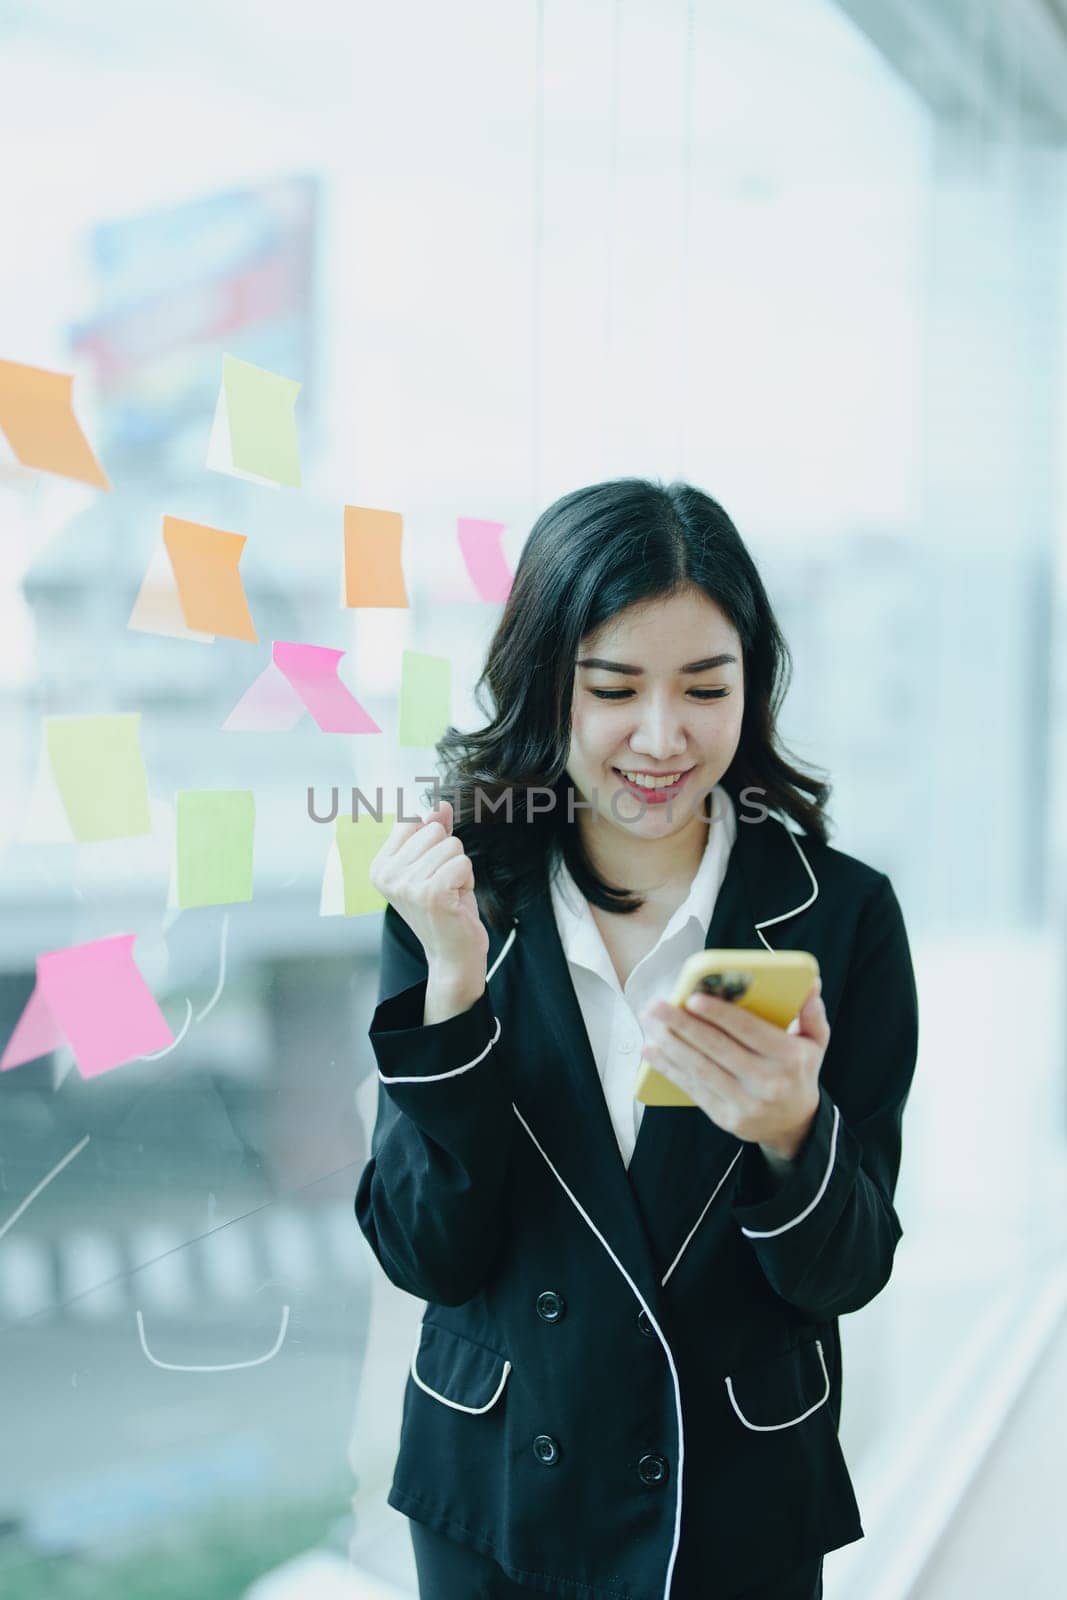 A portrait of an Asian business owner showing a smiling and happy face using her phone standing by a window in a conference room.